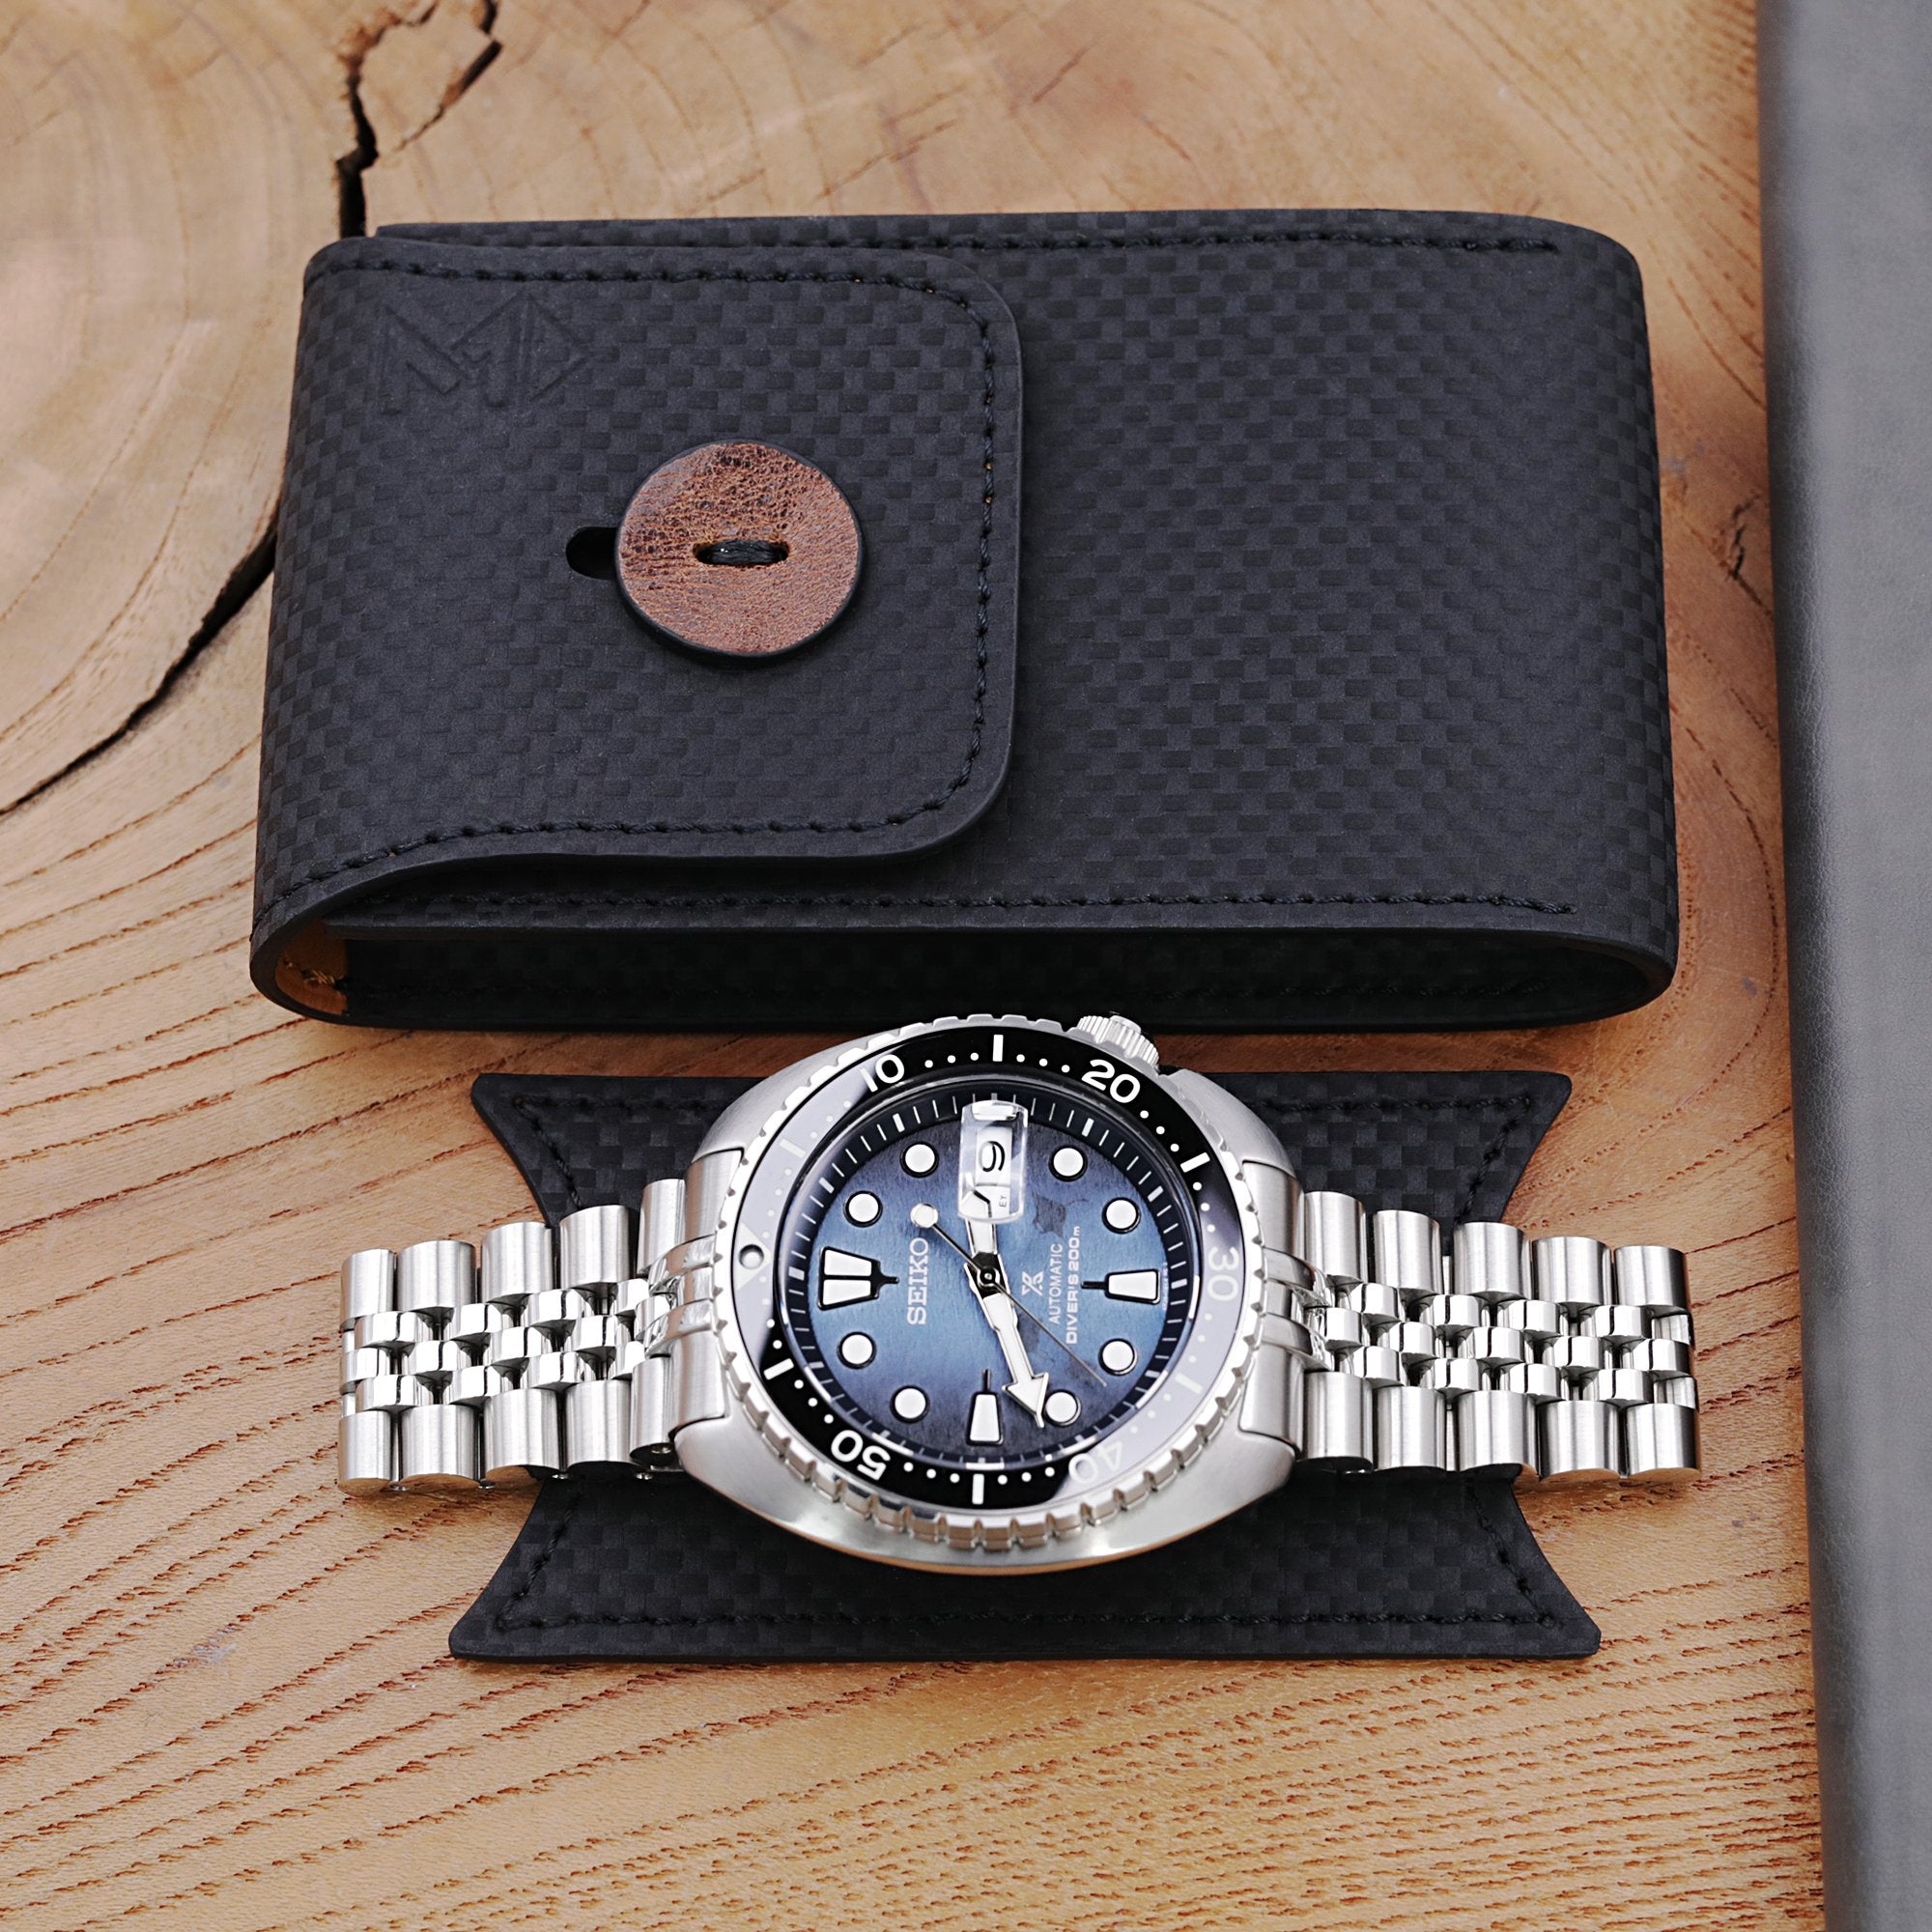 MT-3 German Leather Watch Pouch in Carbon Fiber Pattern for Watch Bracelet Strapcode Watch Bands